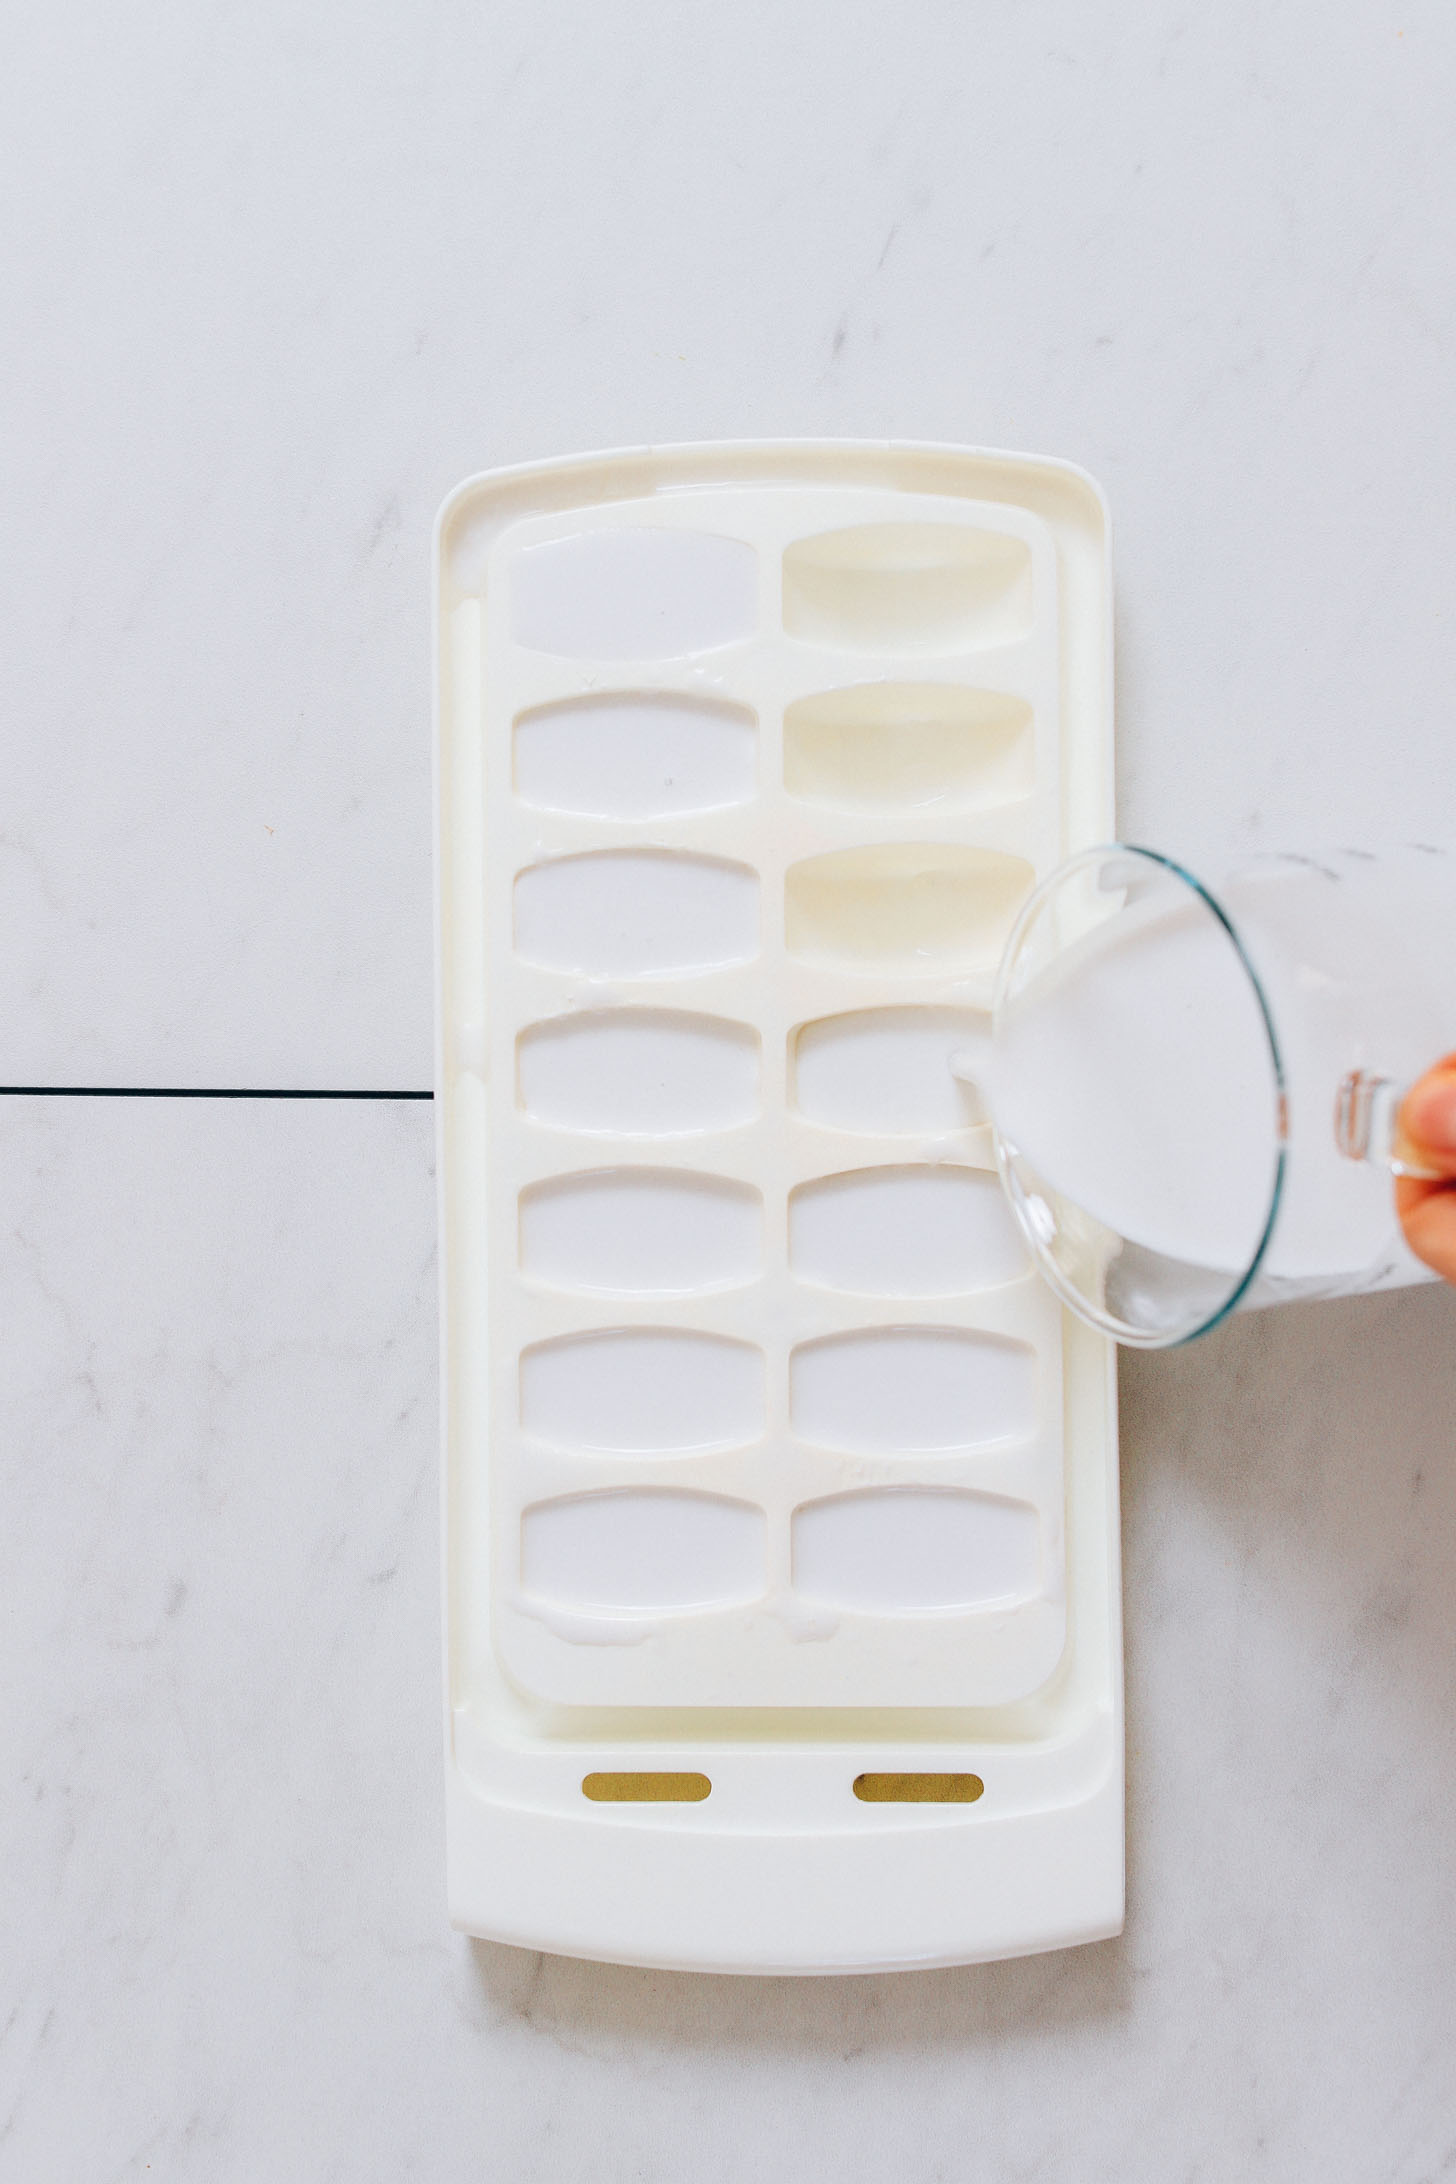 Pouring coconut milk into an ice cube tray to make our Creamy Cold Brew Coffee Smoothie recipe